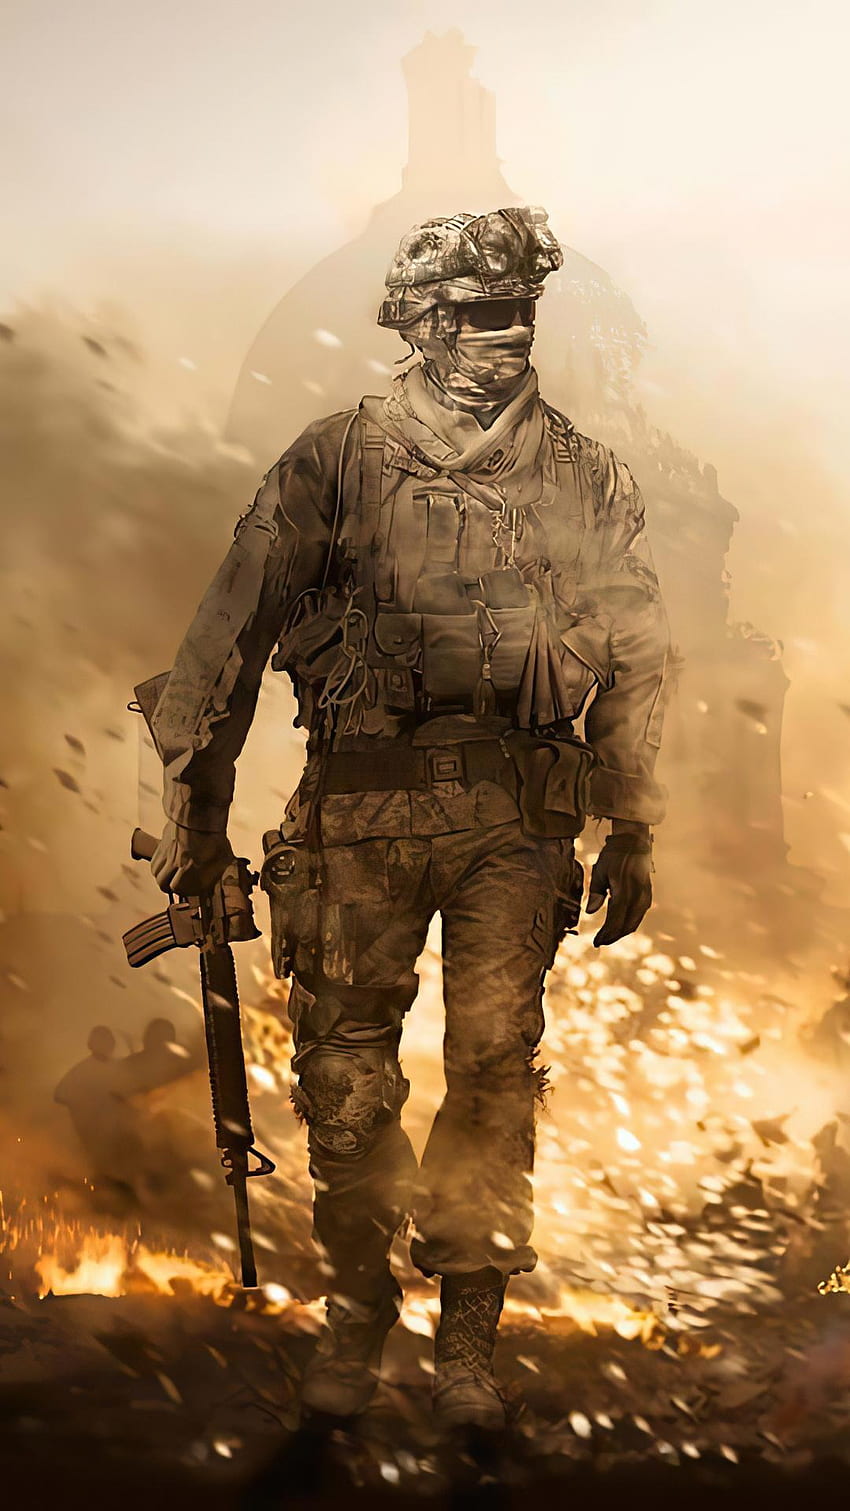 Call of Duty - & 1.0 APK app Android. APK APP GALLERY HD phone wallpaper